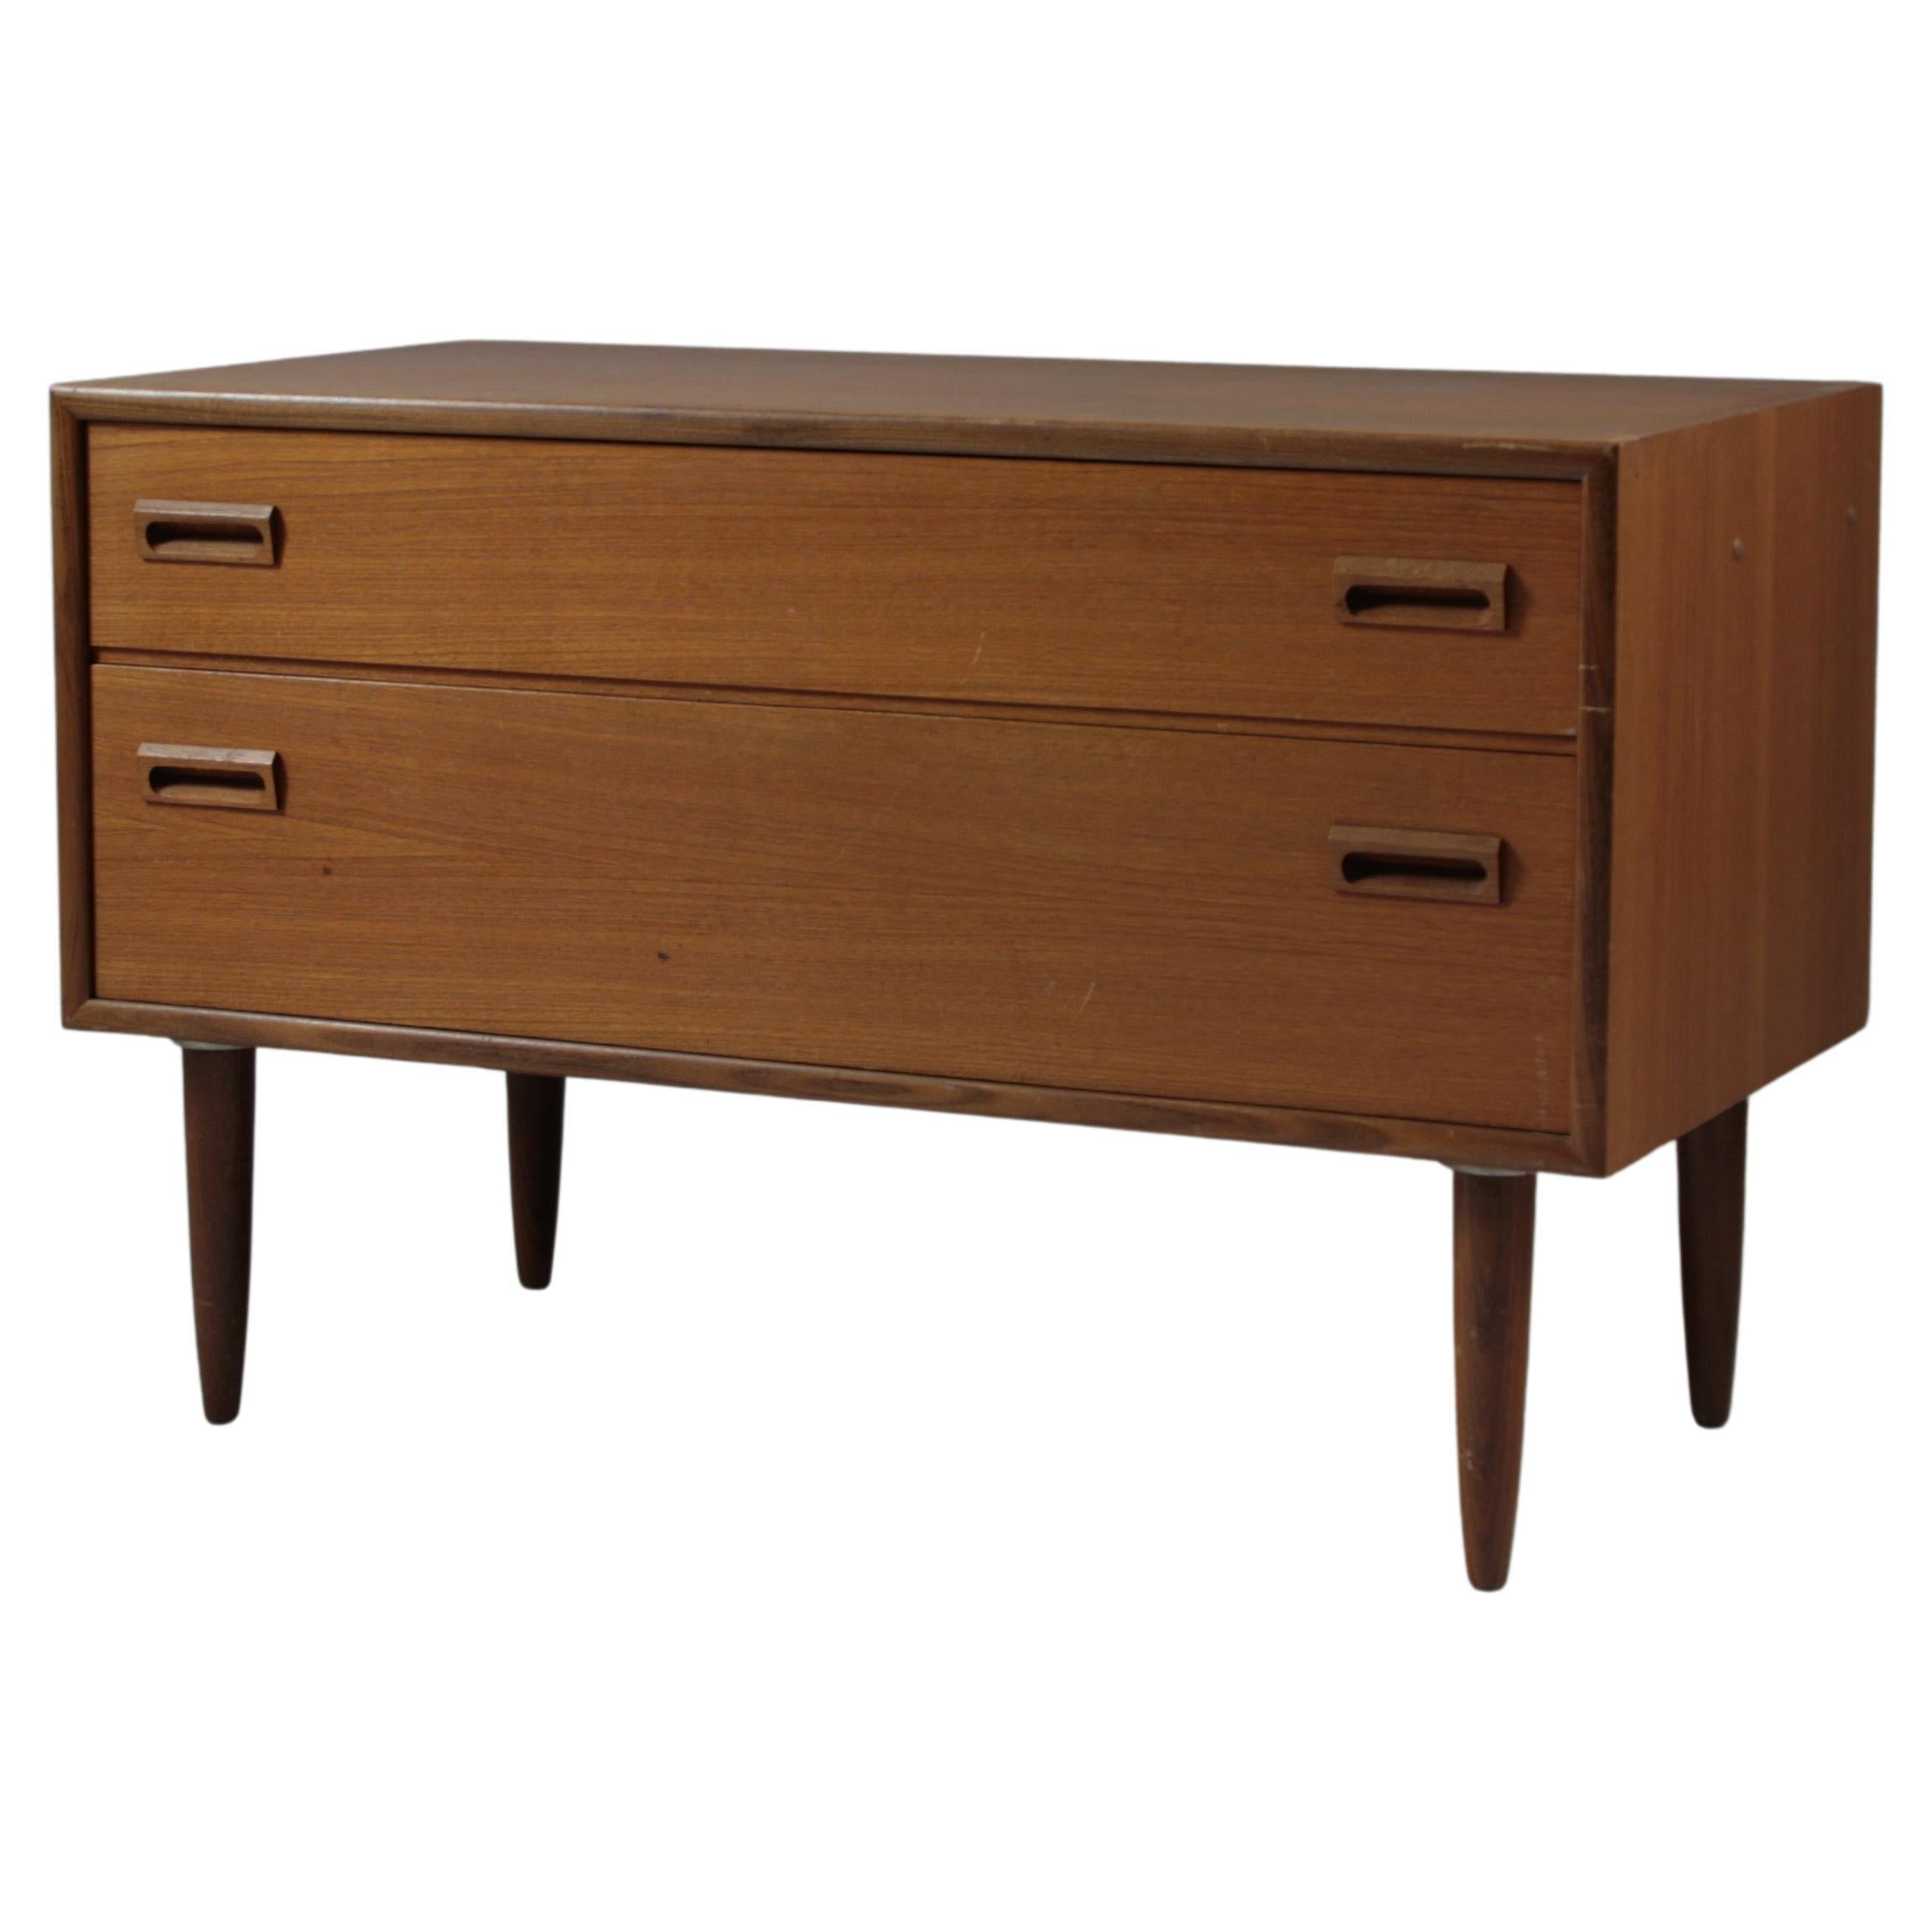 Small teak chest of drawers by Stratégie Meubelen, 1950s